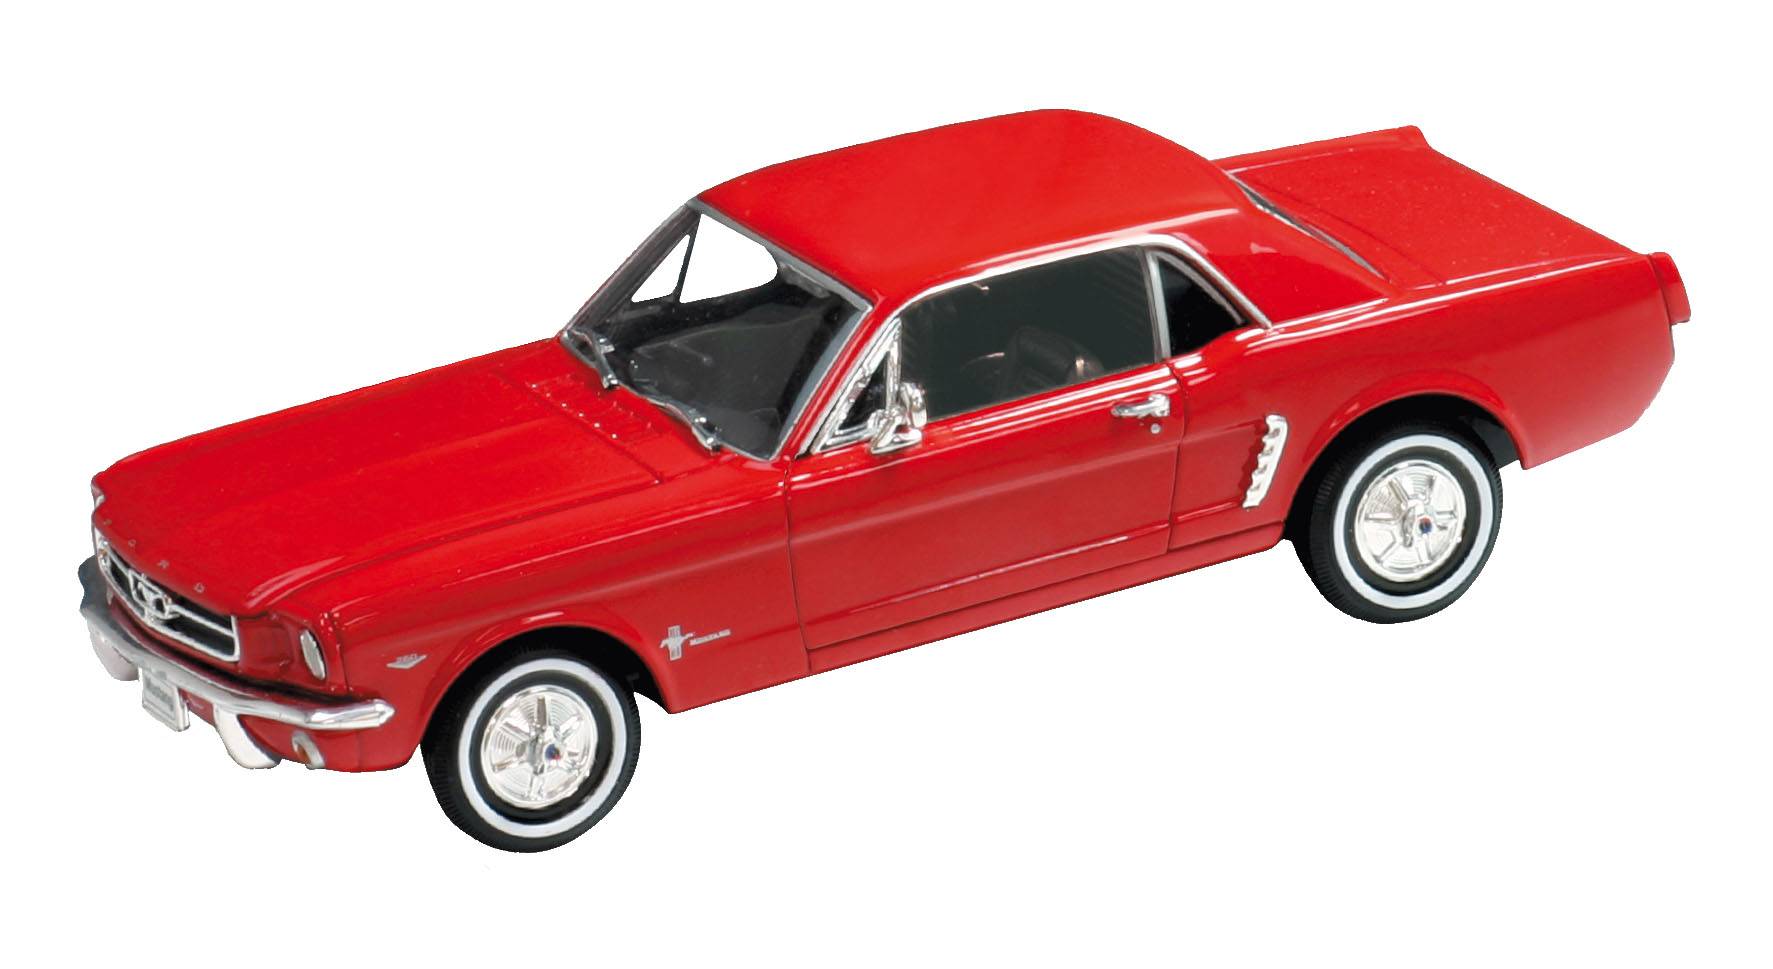 Все мои модели. Welly машинки 1964 Ford Mustang. Ford Mustang 1/24. Ford Mustang 1 24 Welly. Welly Ford Mustang 1964 1:60.